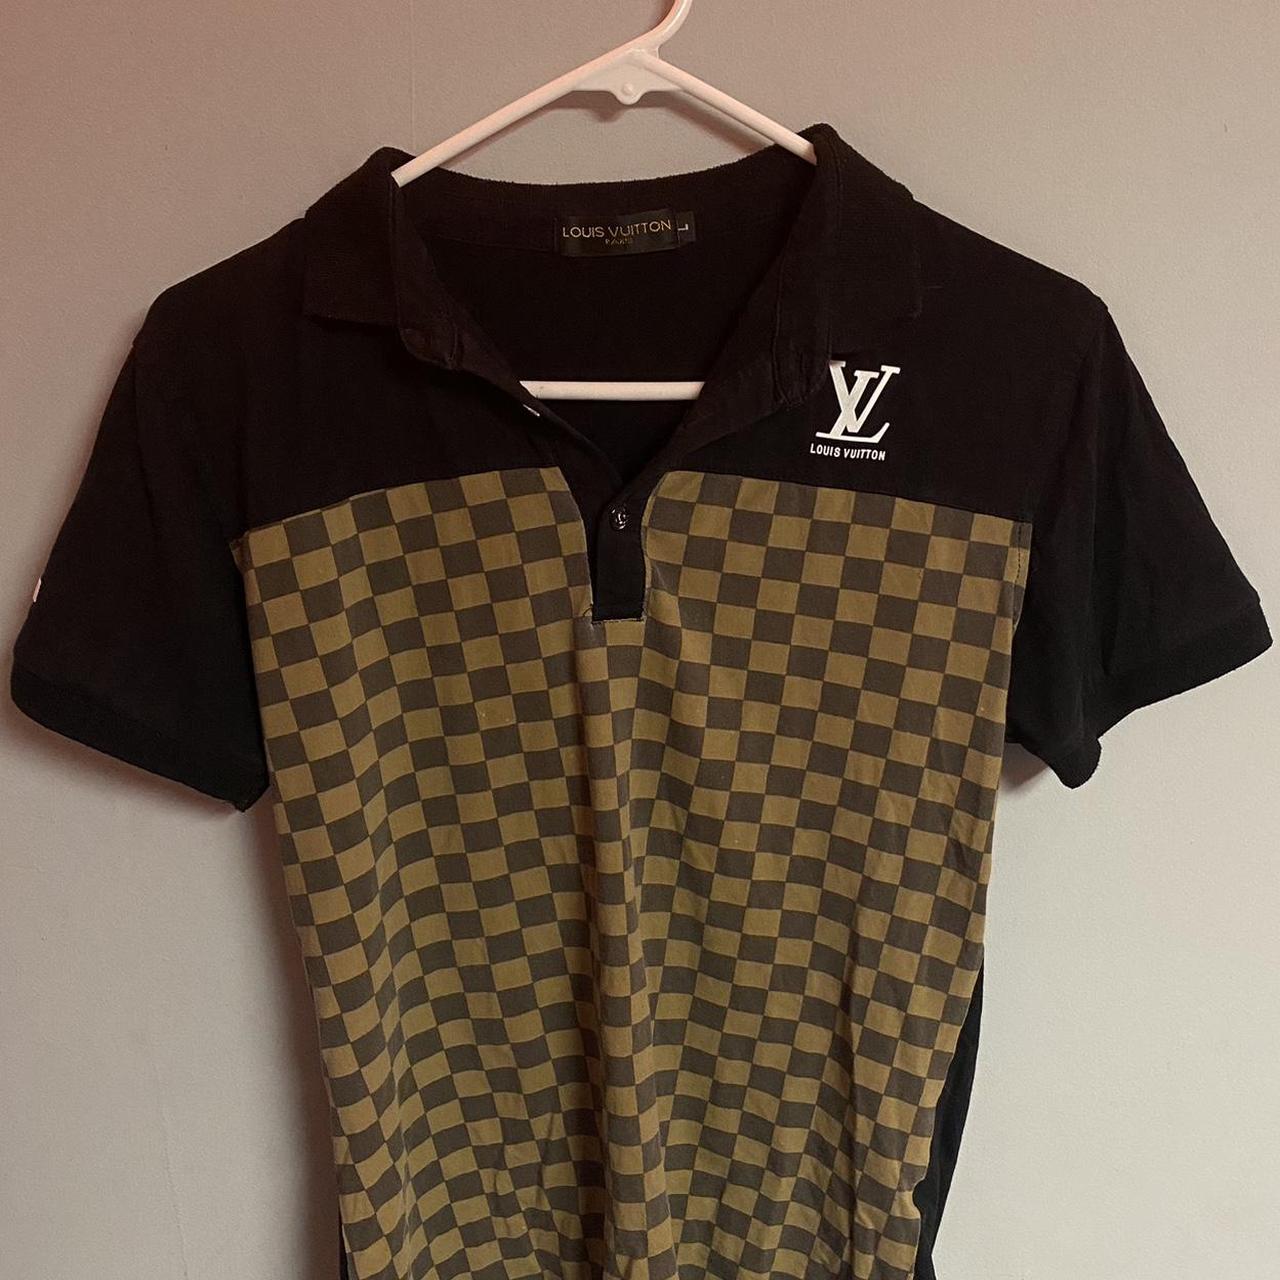 Louis Vuitton collared black and brown checkered